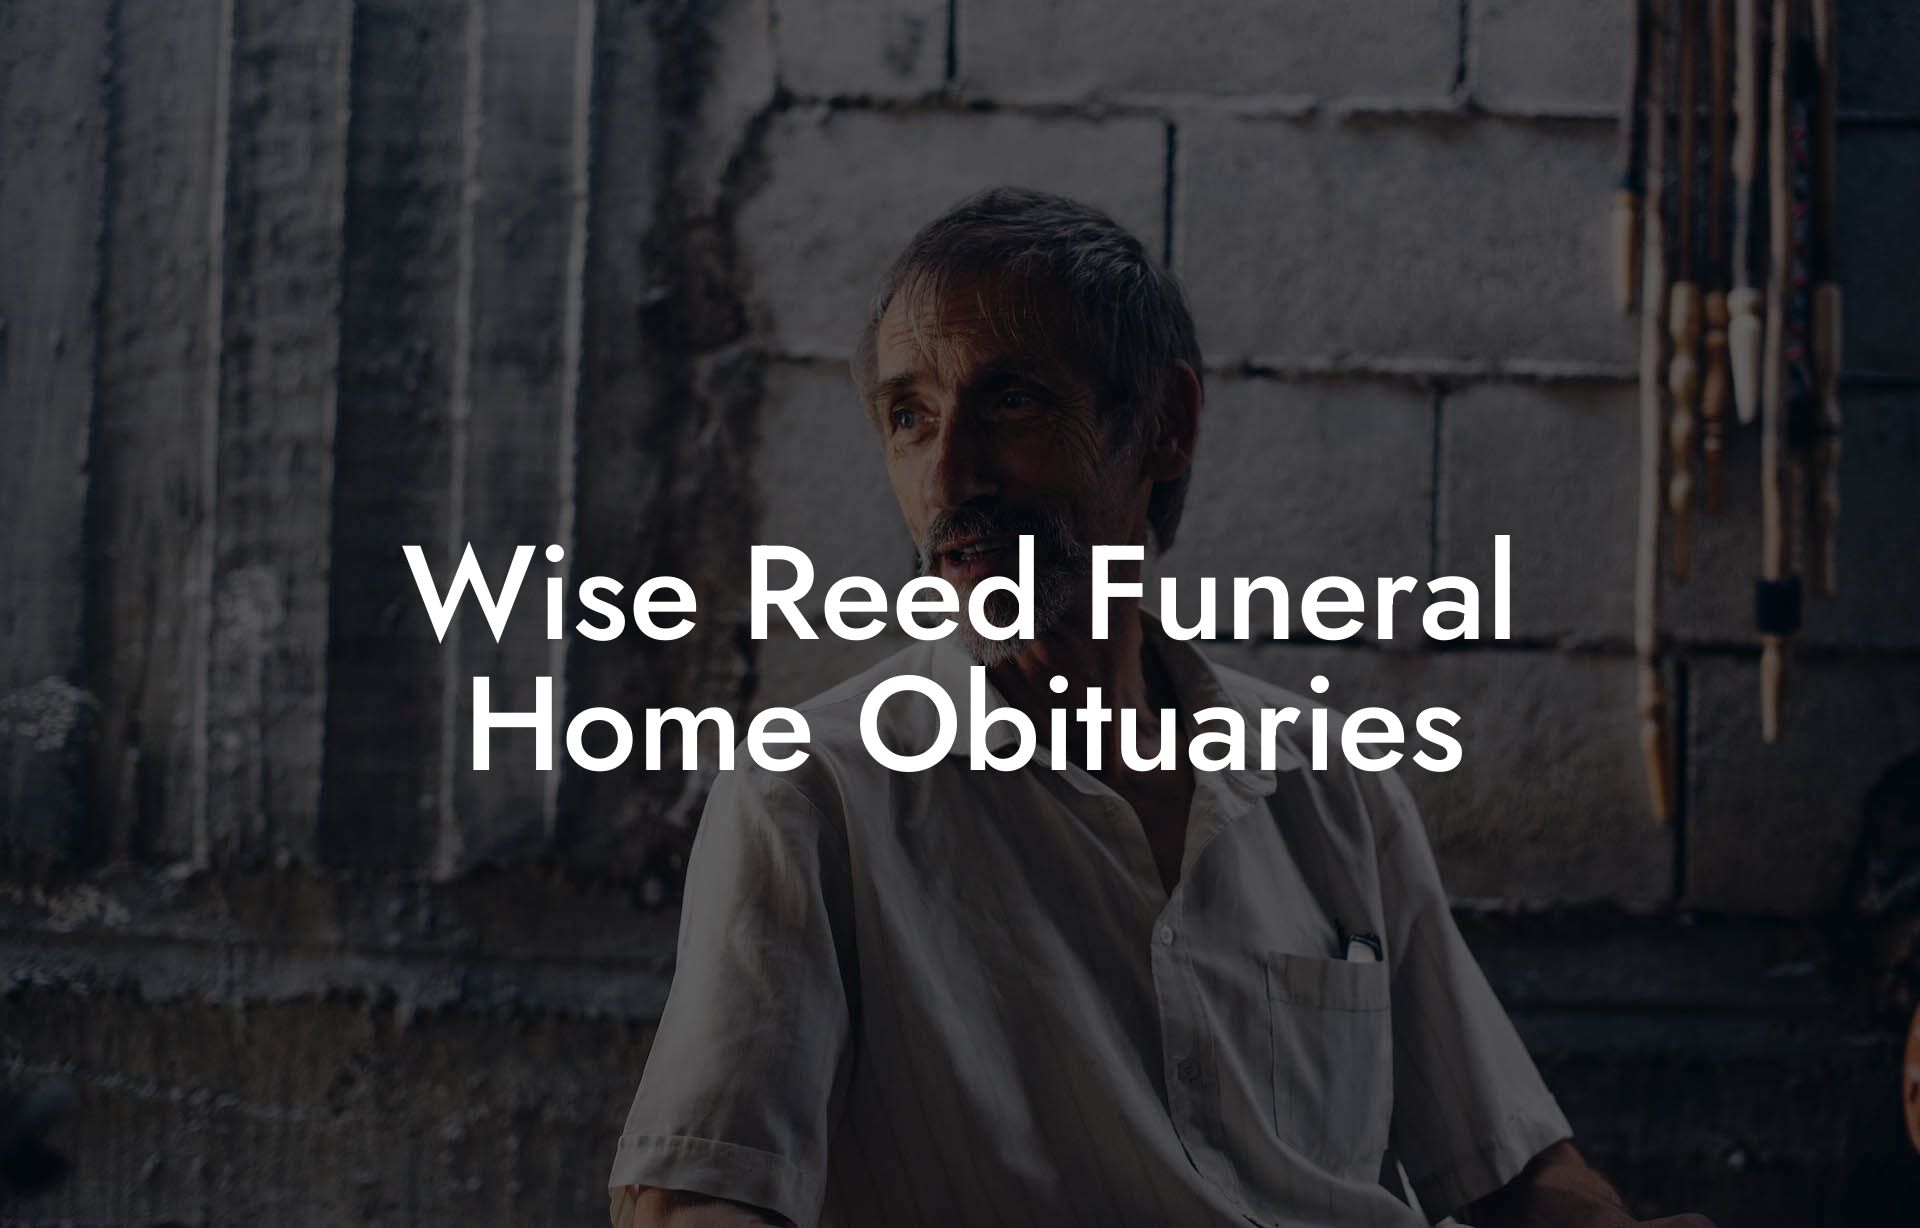 Wise Reed Funeral Home Obituaries